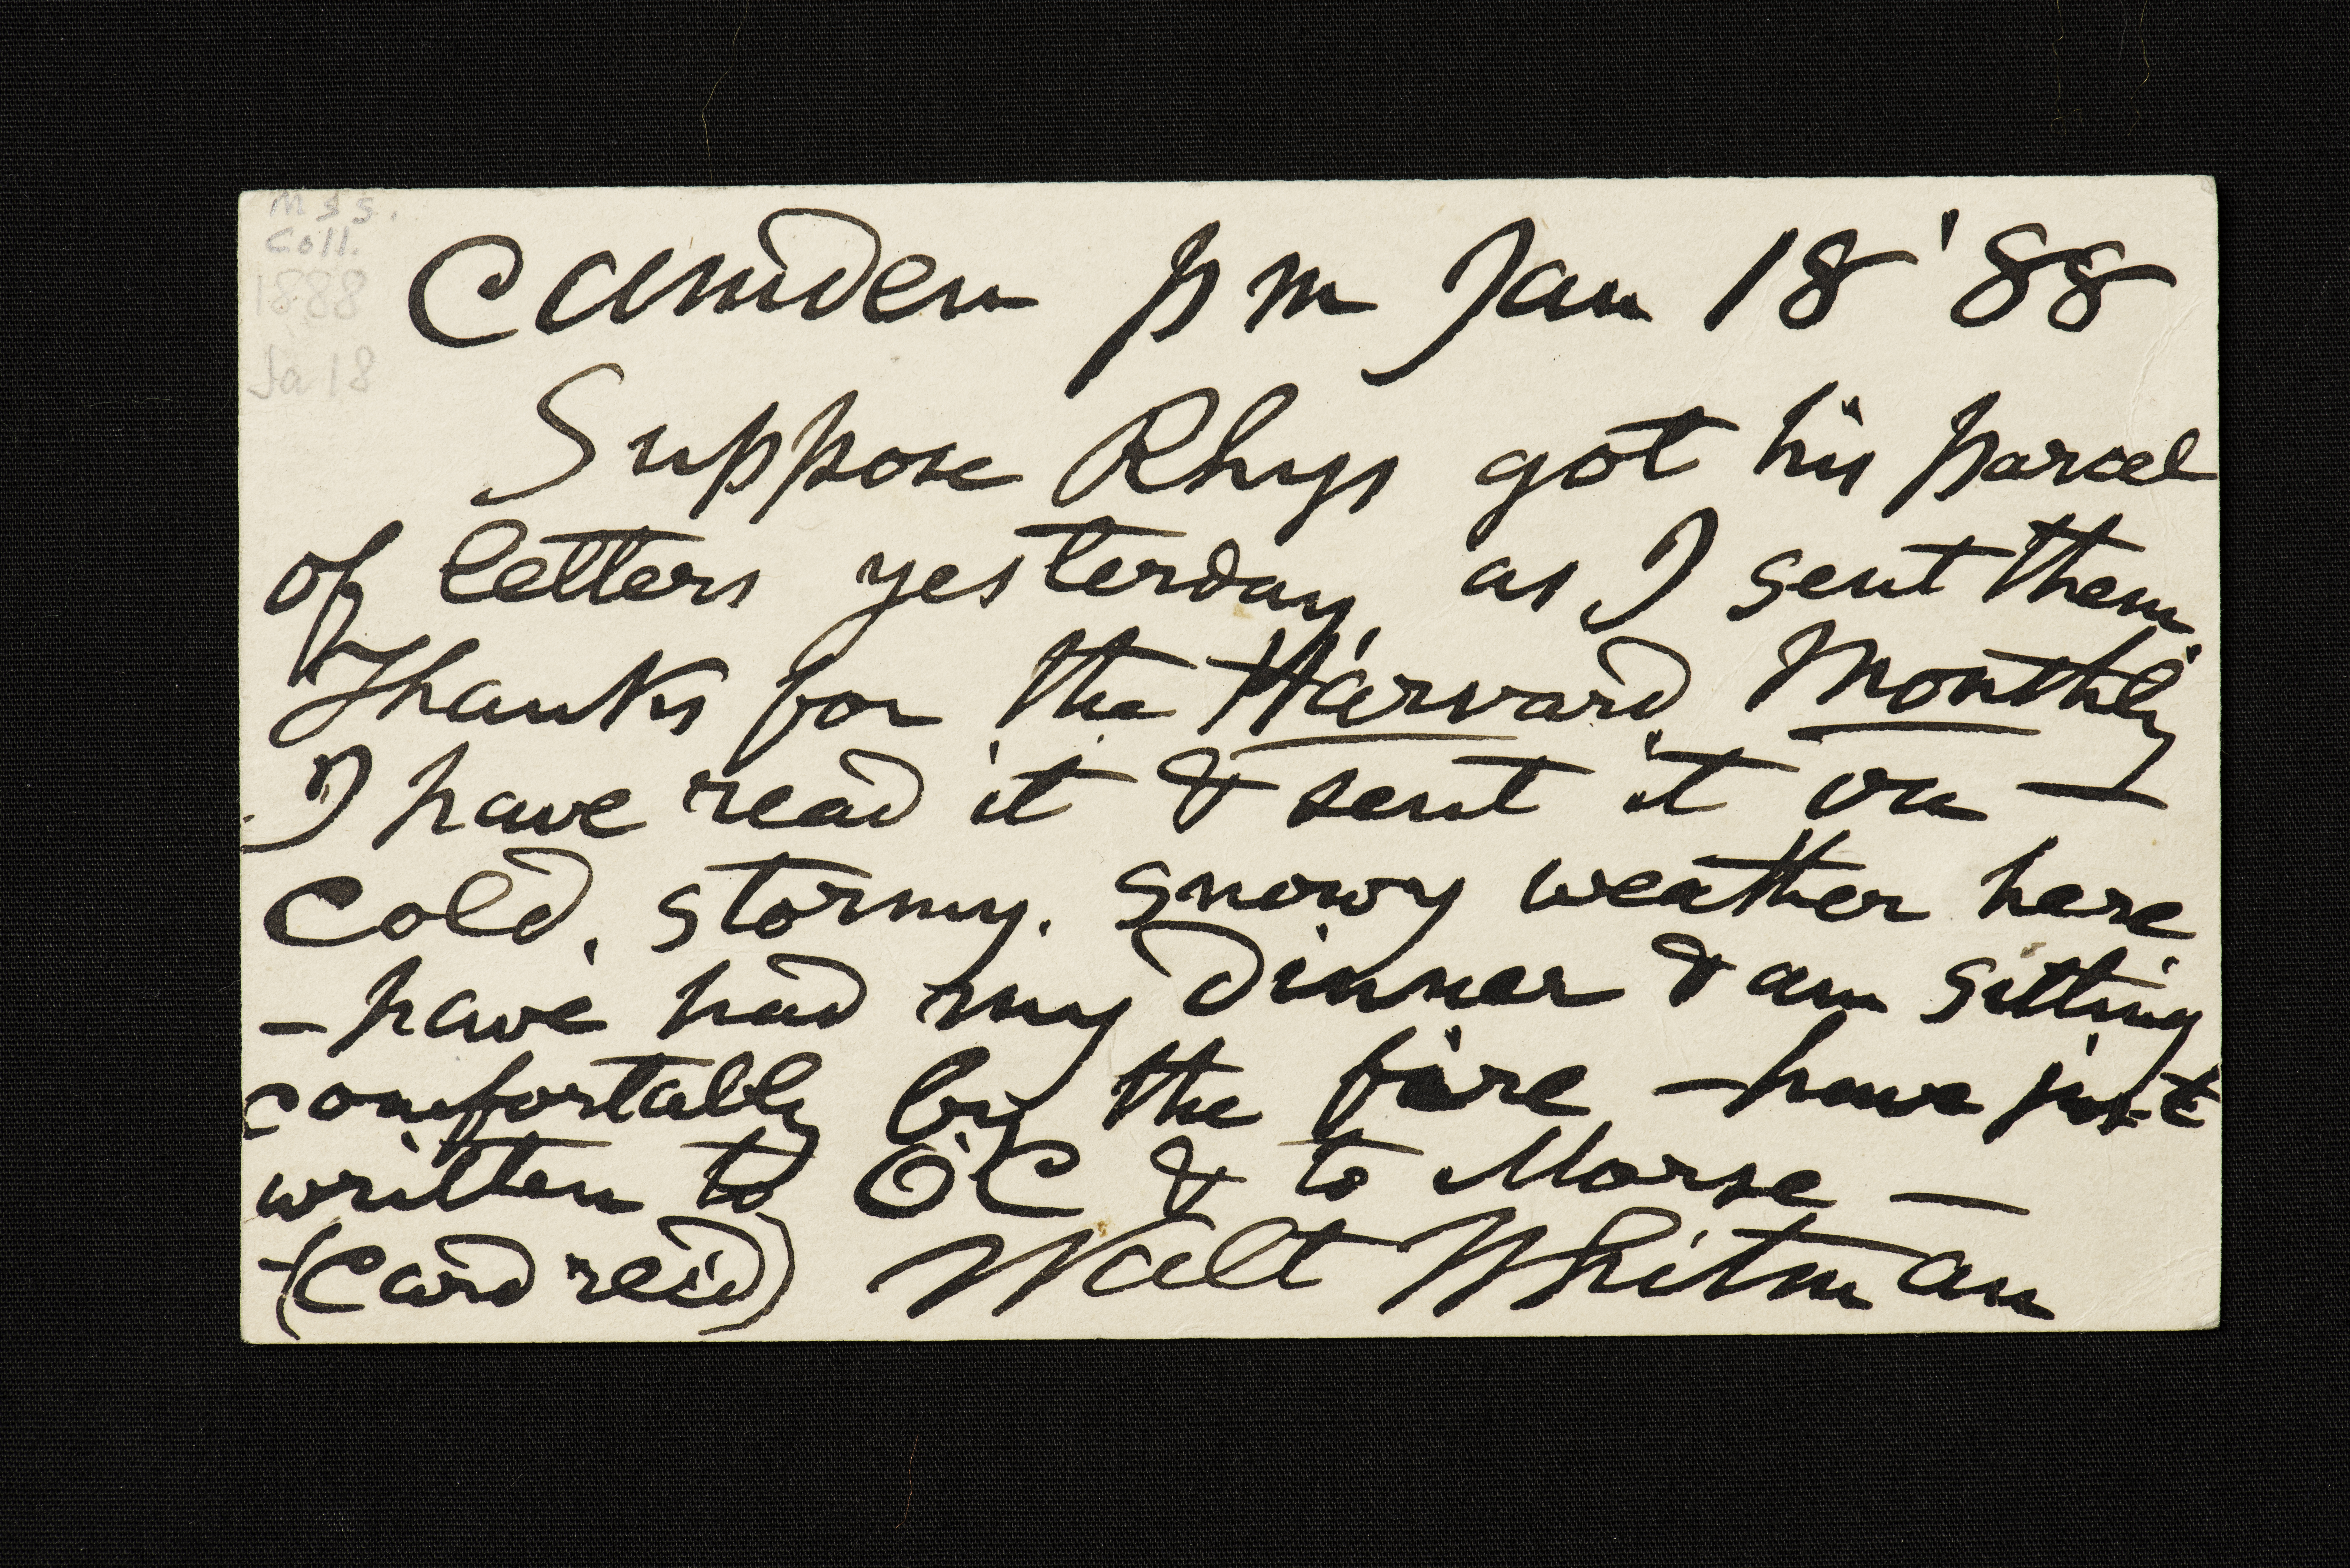 A postcard from Whitman to William Sloane Kennedy, January 18, 1888. “It’s enlightening for students and researchers to see and  experience these hand-written documents, connecting with their authors  through these intimate exchanges, decades or sometimes centuries after  they were written,” says Jessica Lacher-Feldman, assistant dean and the Joseph N. Lambert and Harold B. Schleifer Director of Rare Books, Special Collections, and Preservation. (Department of Rare Books & Special Collections / Photo by J. Adam Fenster)